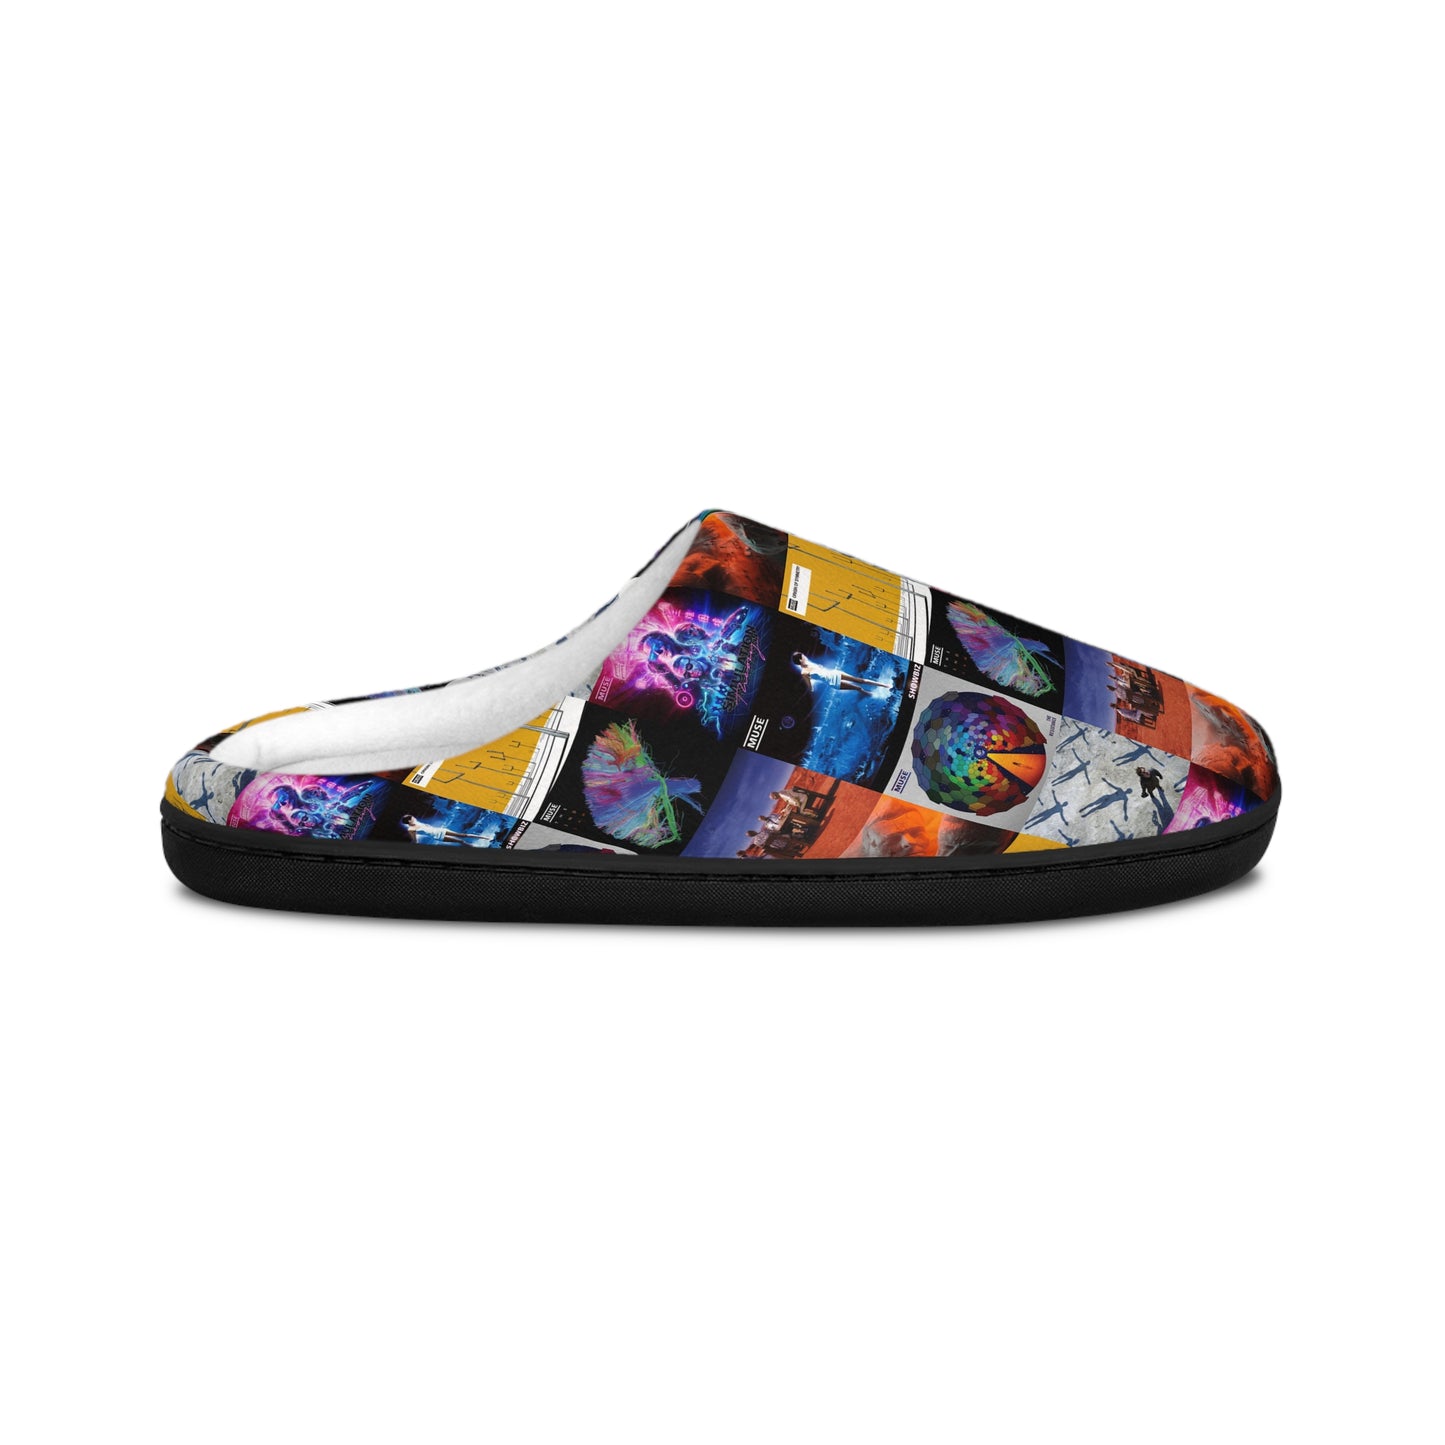 Muse Album Cover Collage Women's Indoor Slippers